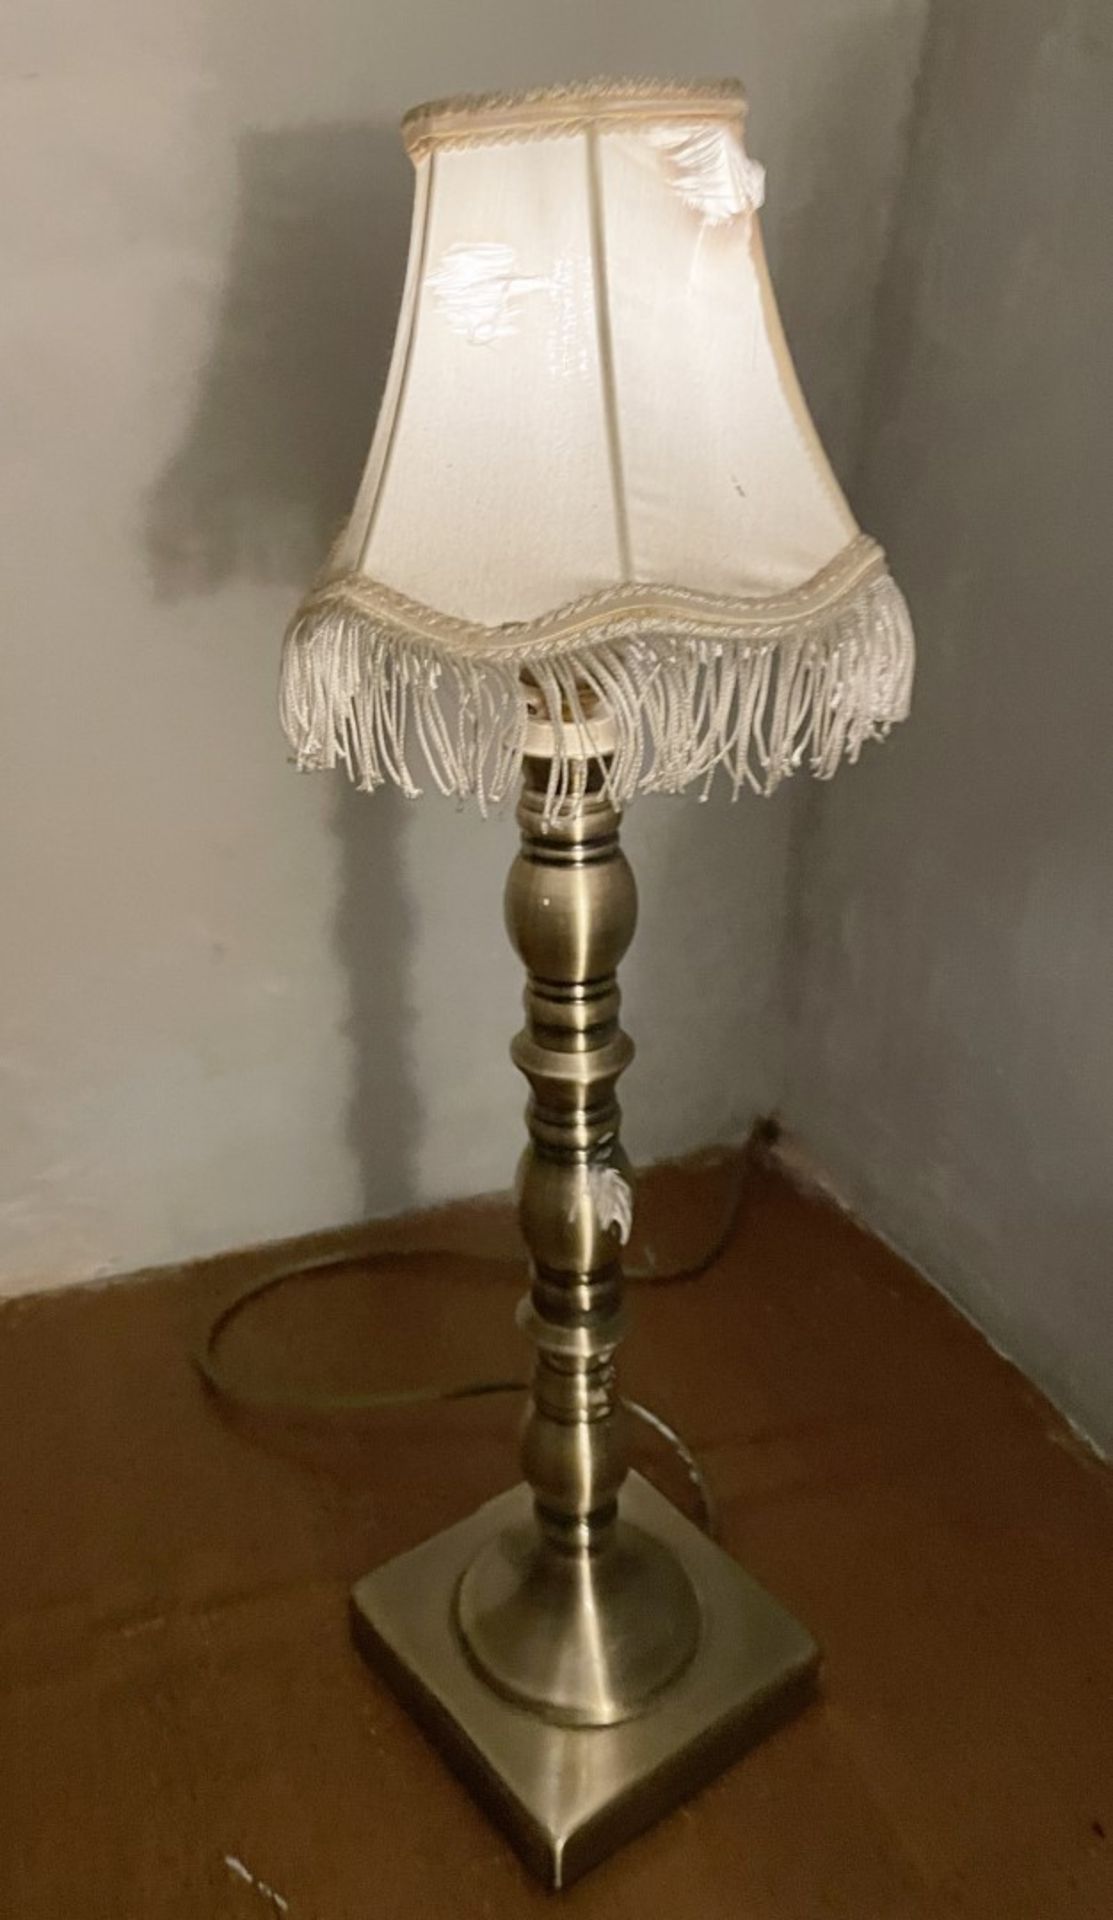 8 x Assorted Vintage-style Table Lamps with Metal Bases and a Variety of Shades - Image 4 of 6